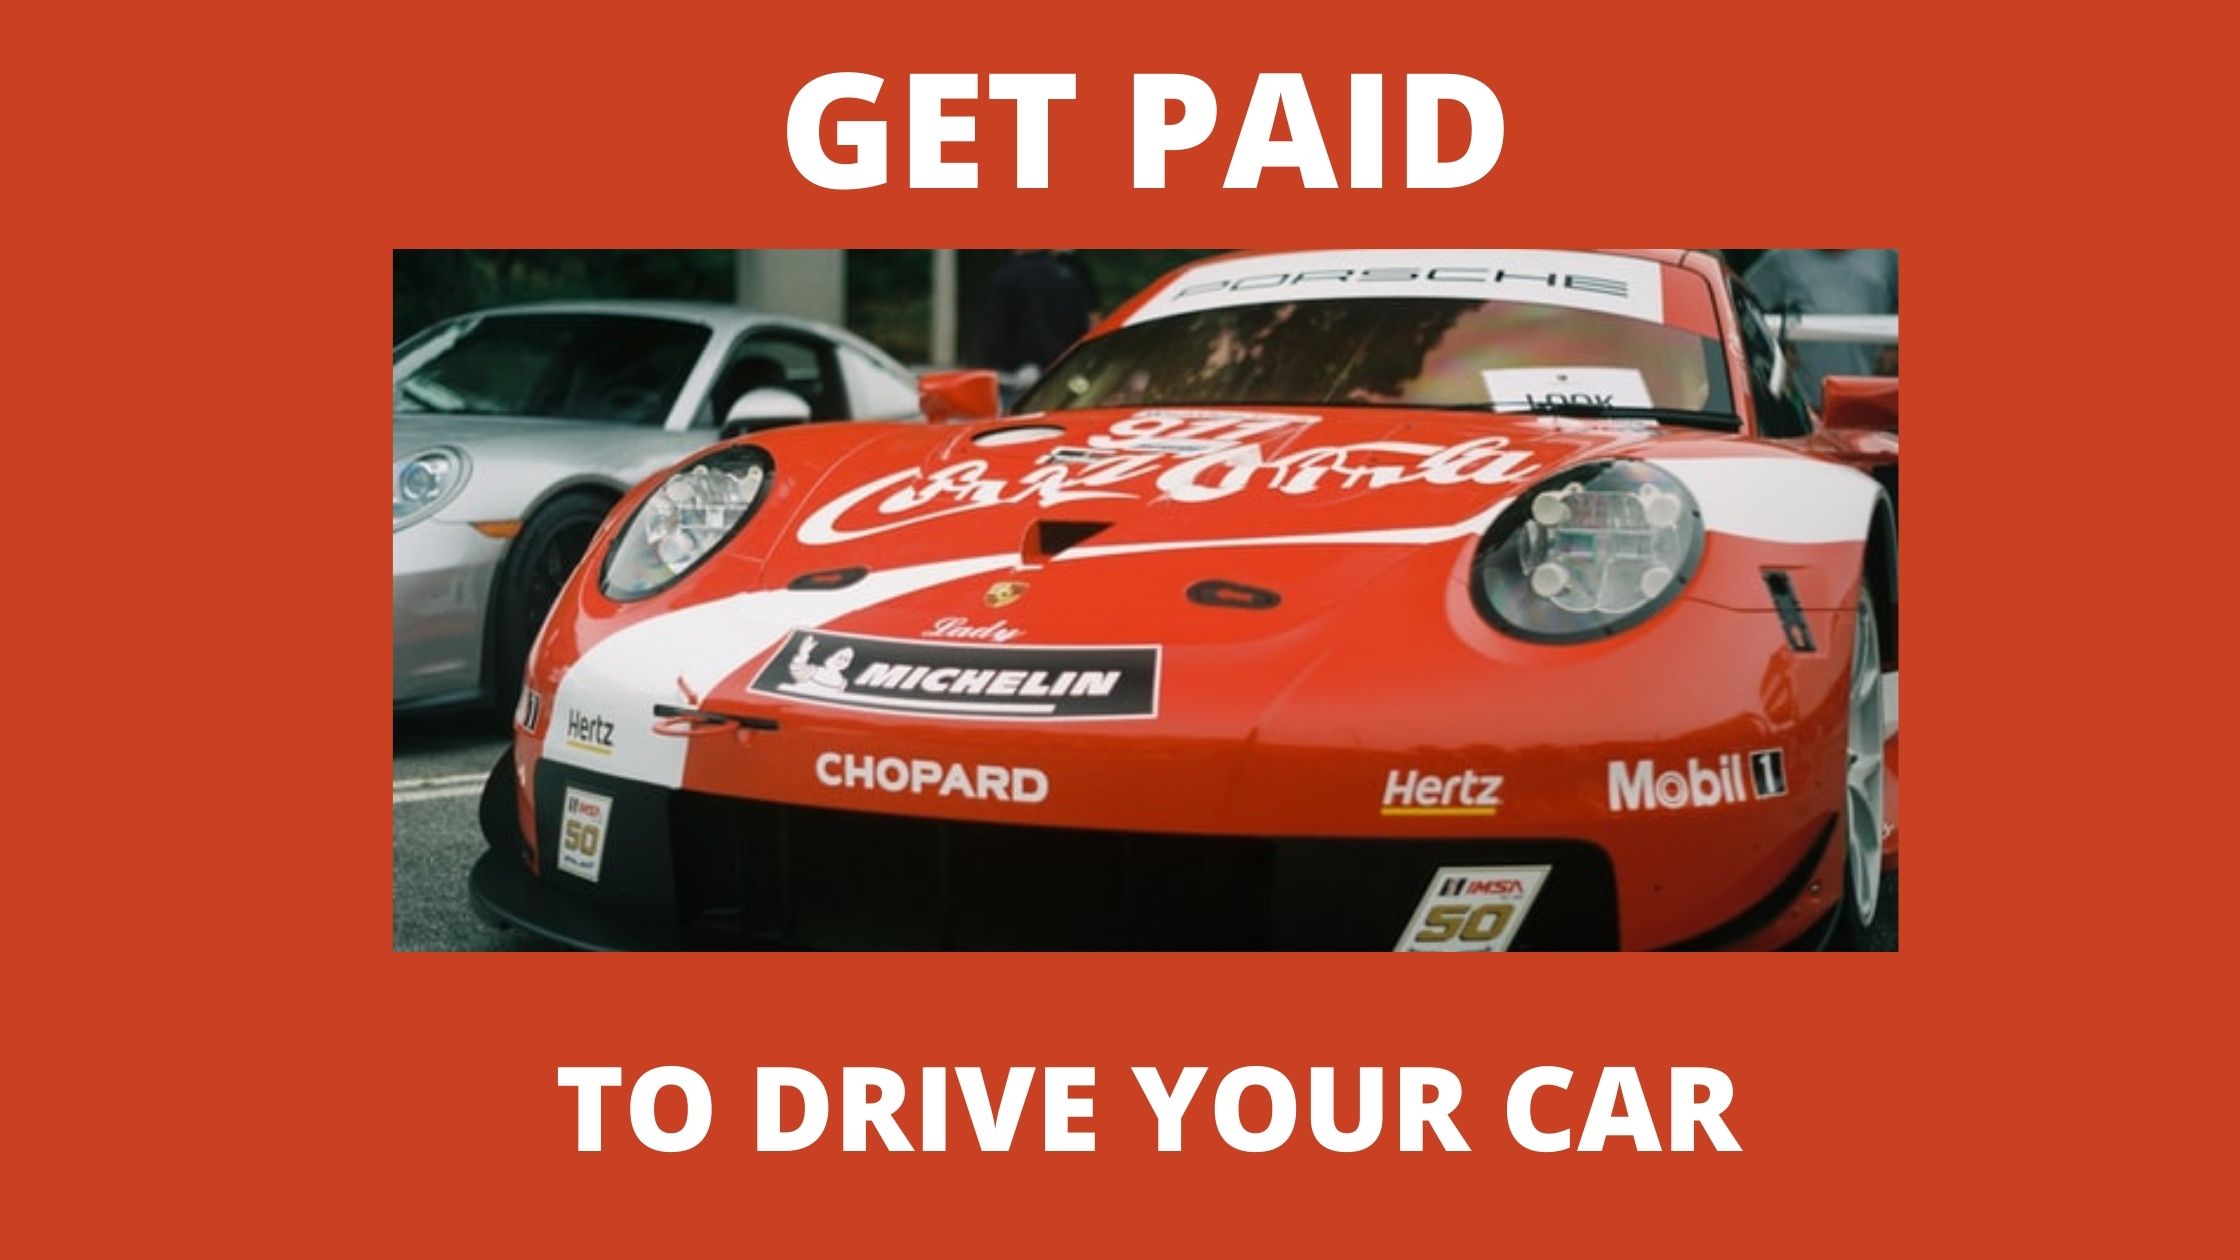 Drive your car and get paid